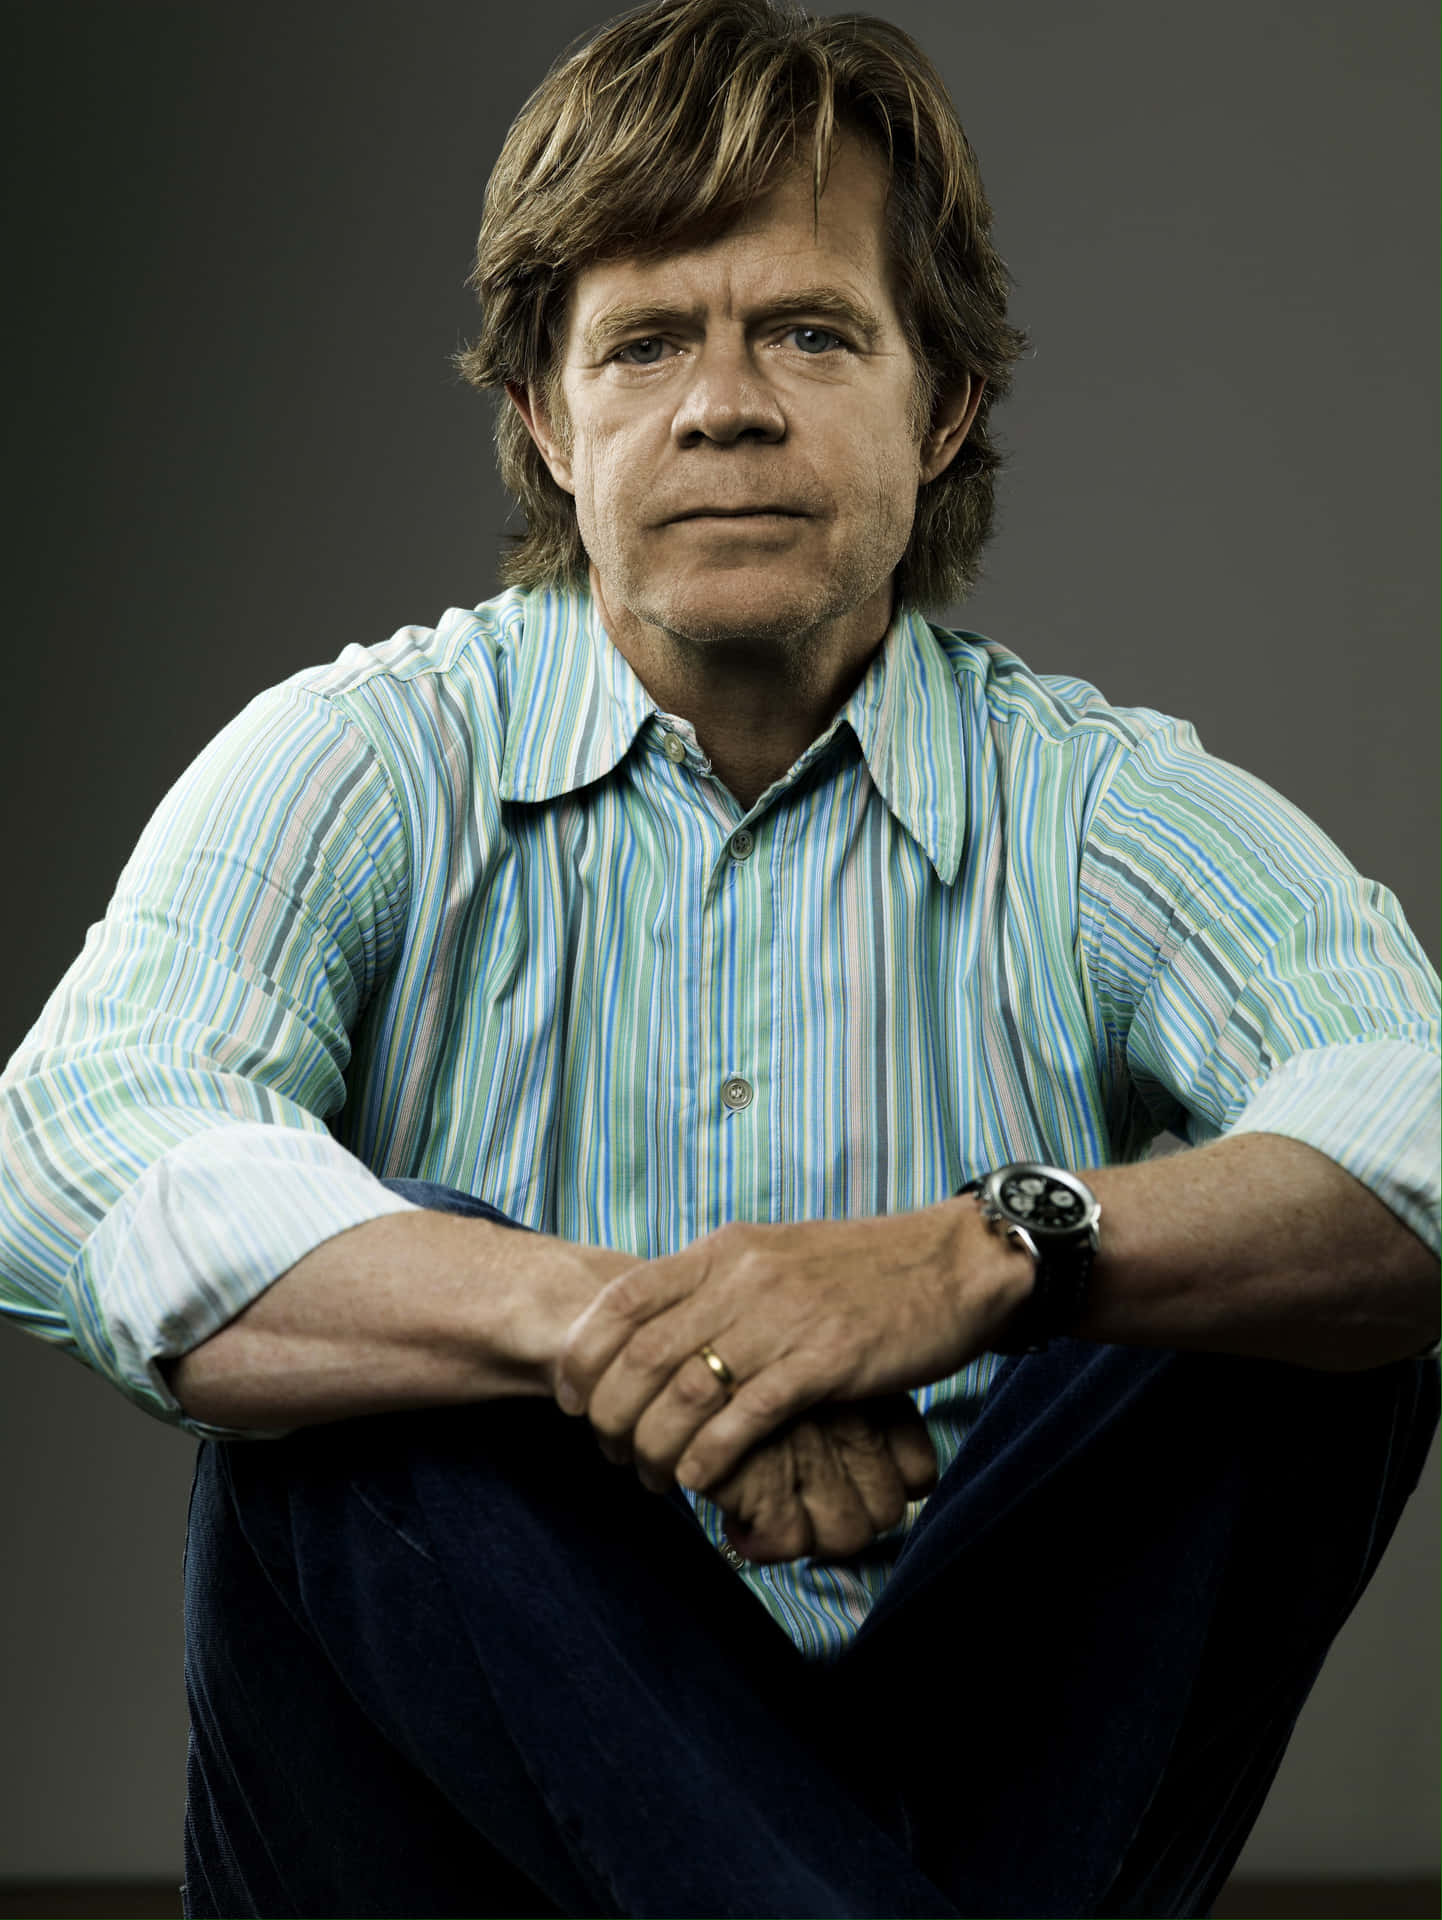 William H. Macy Posing At An Event Background